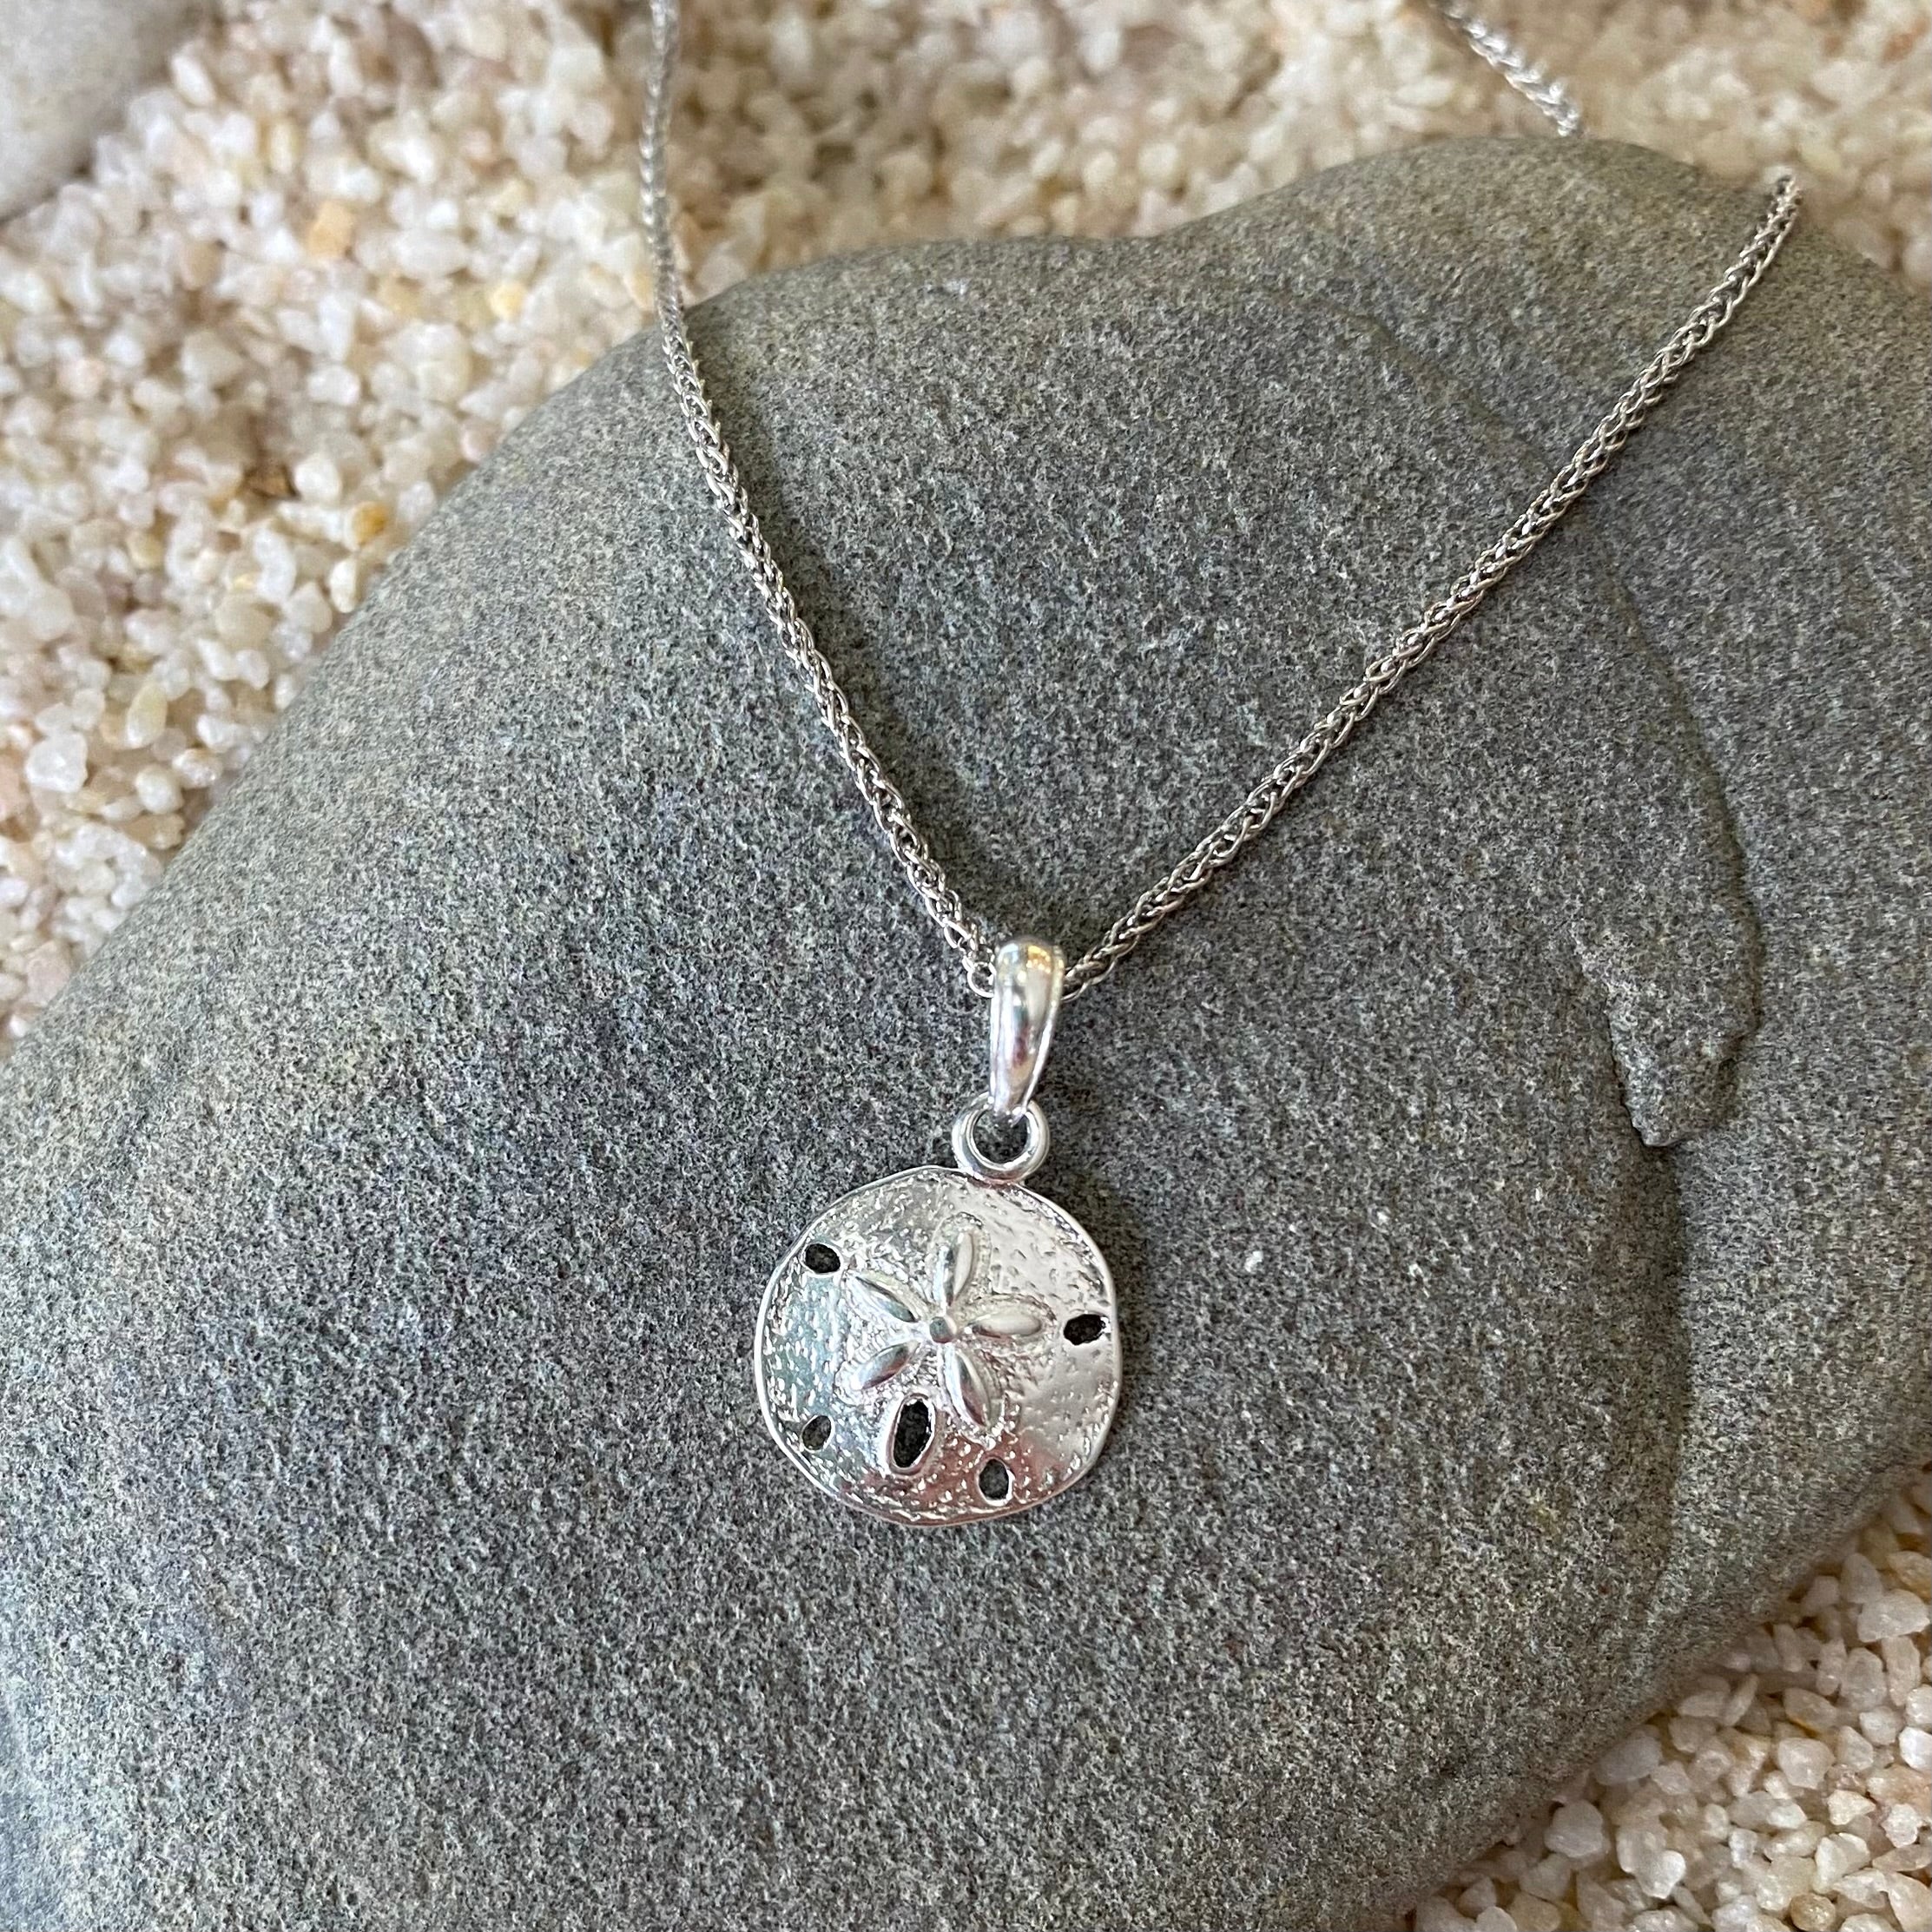 Sand Dollar Necklace, Sterling Silver Sand dollar Necklace for Women, Beach Charm  Pendant Necklace (18 inches plus 2-inch extender) : Amazon.ca: Handmade  Products